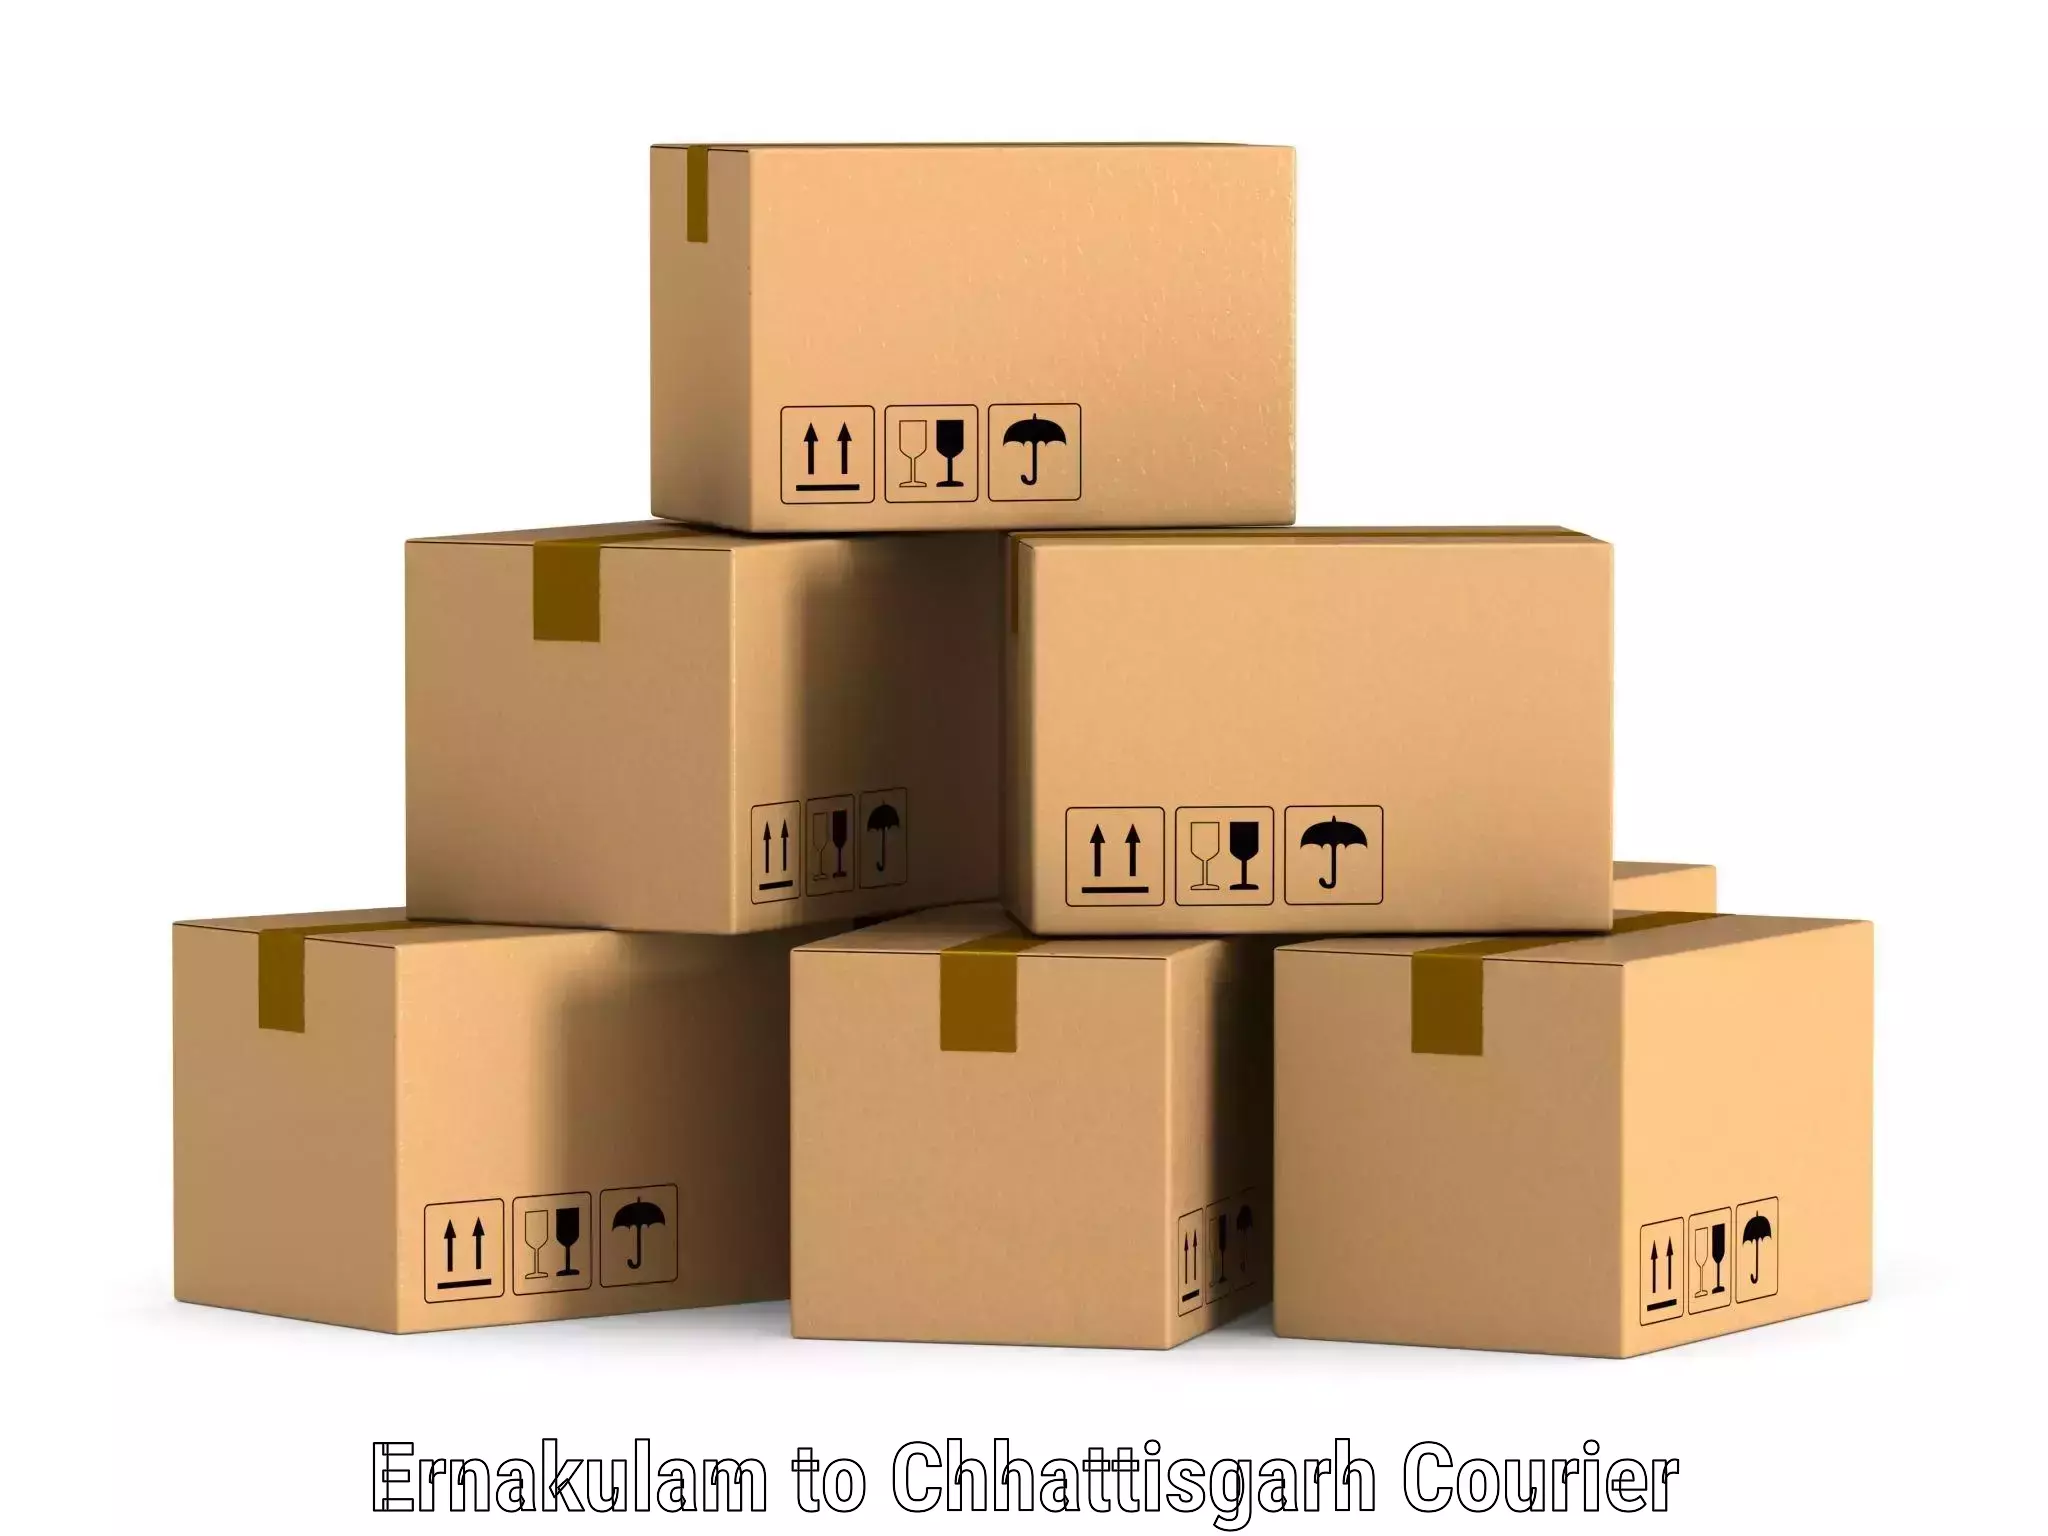 Competitive shipping rates in Ernakulam to Patna Chhattisgarh